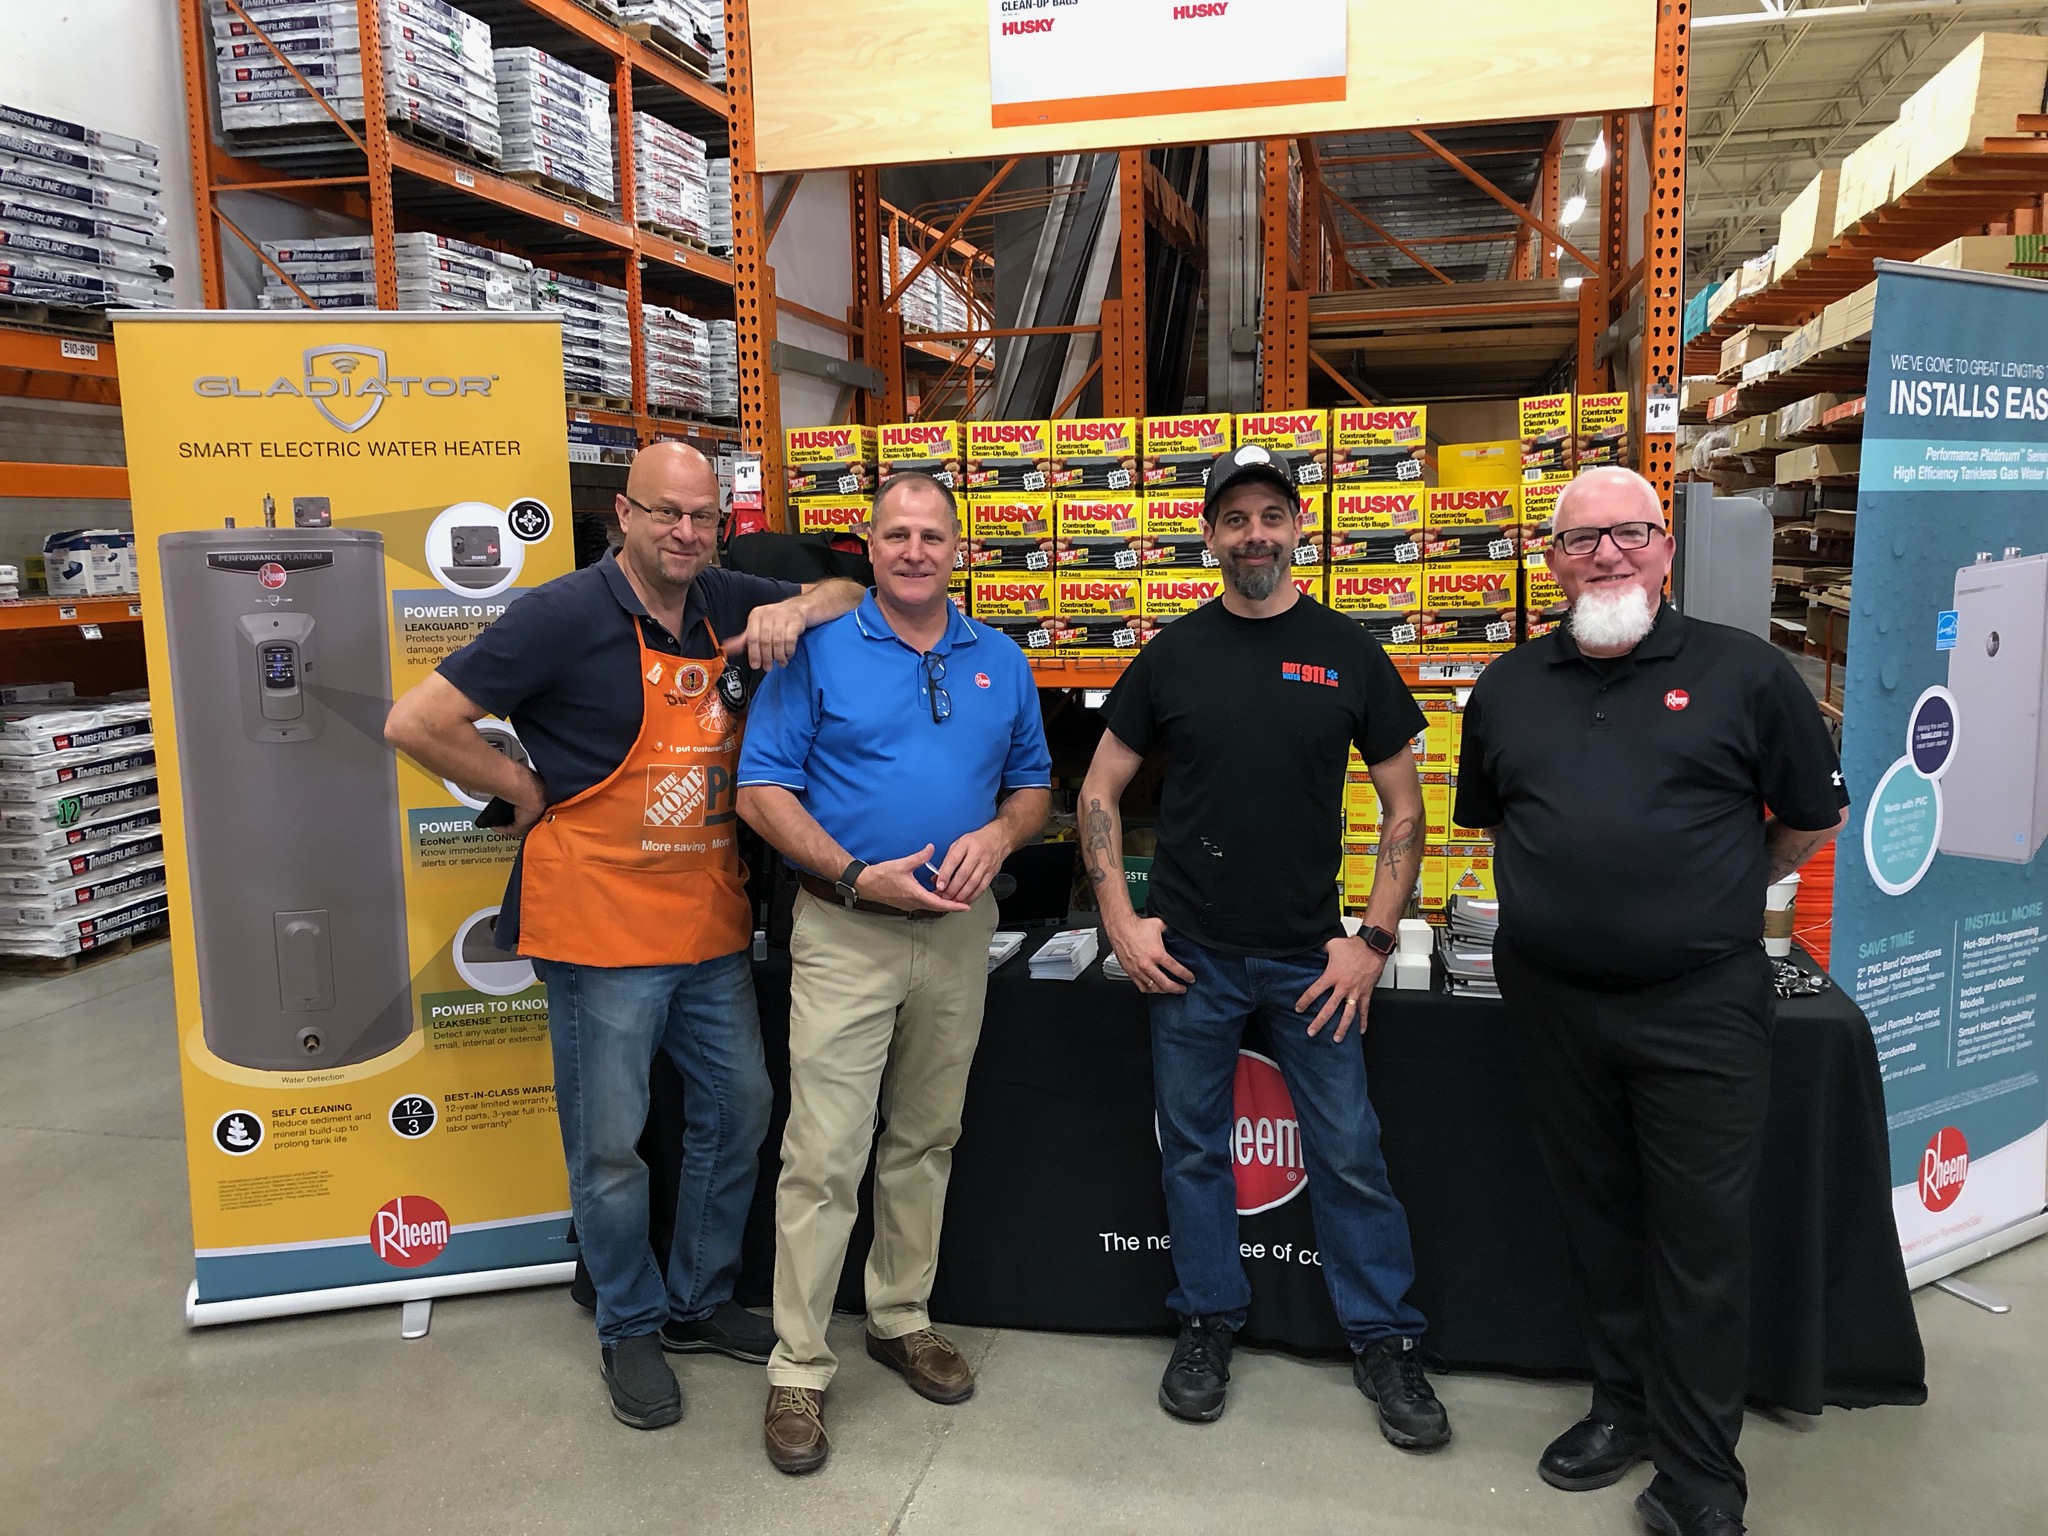 Hot Water Rheem And Home Depot What A Team